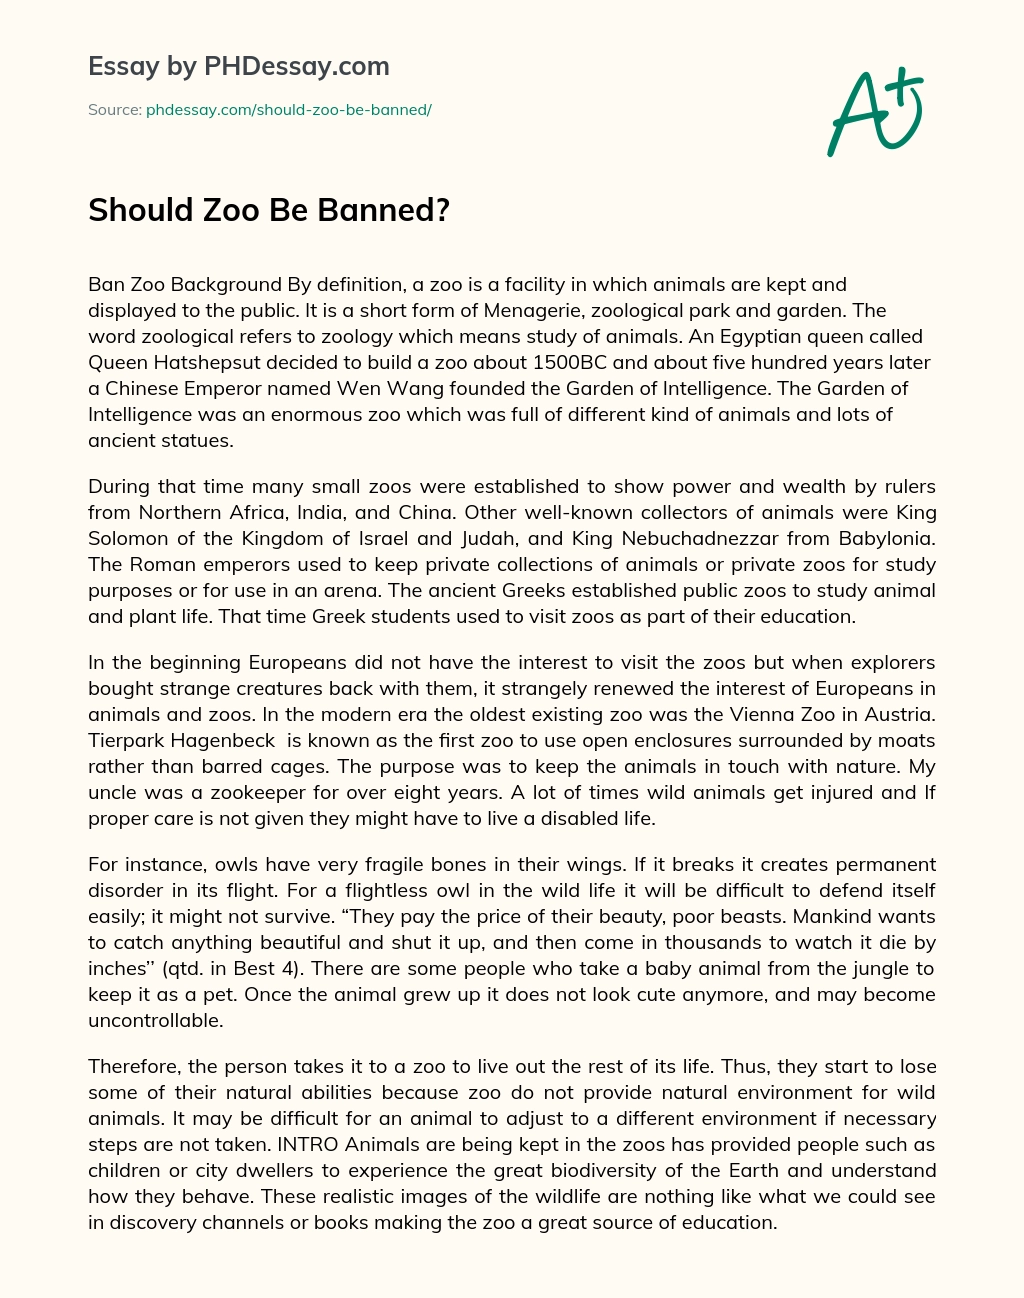 Should Zoo Be Banned? Argumentative And Persuasive Essay 